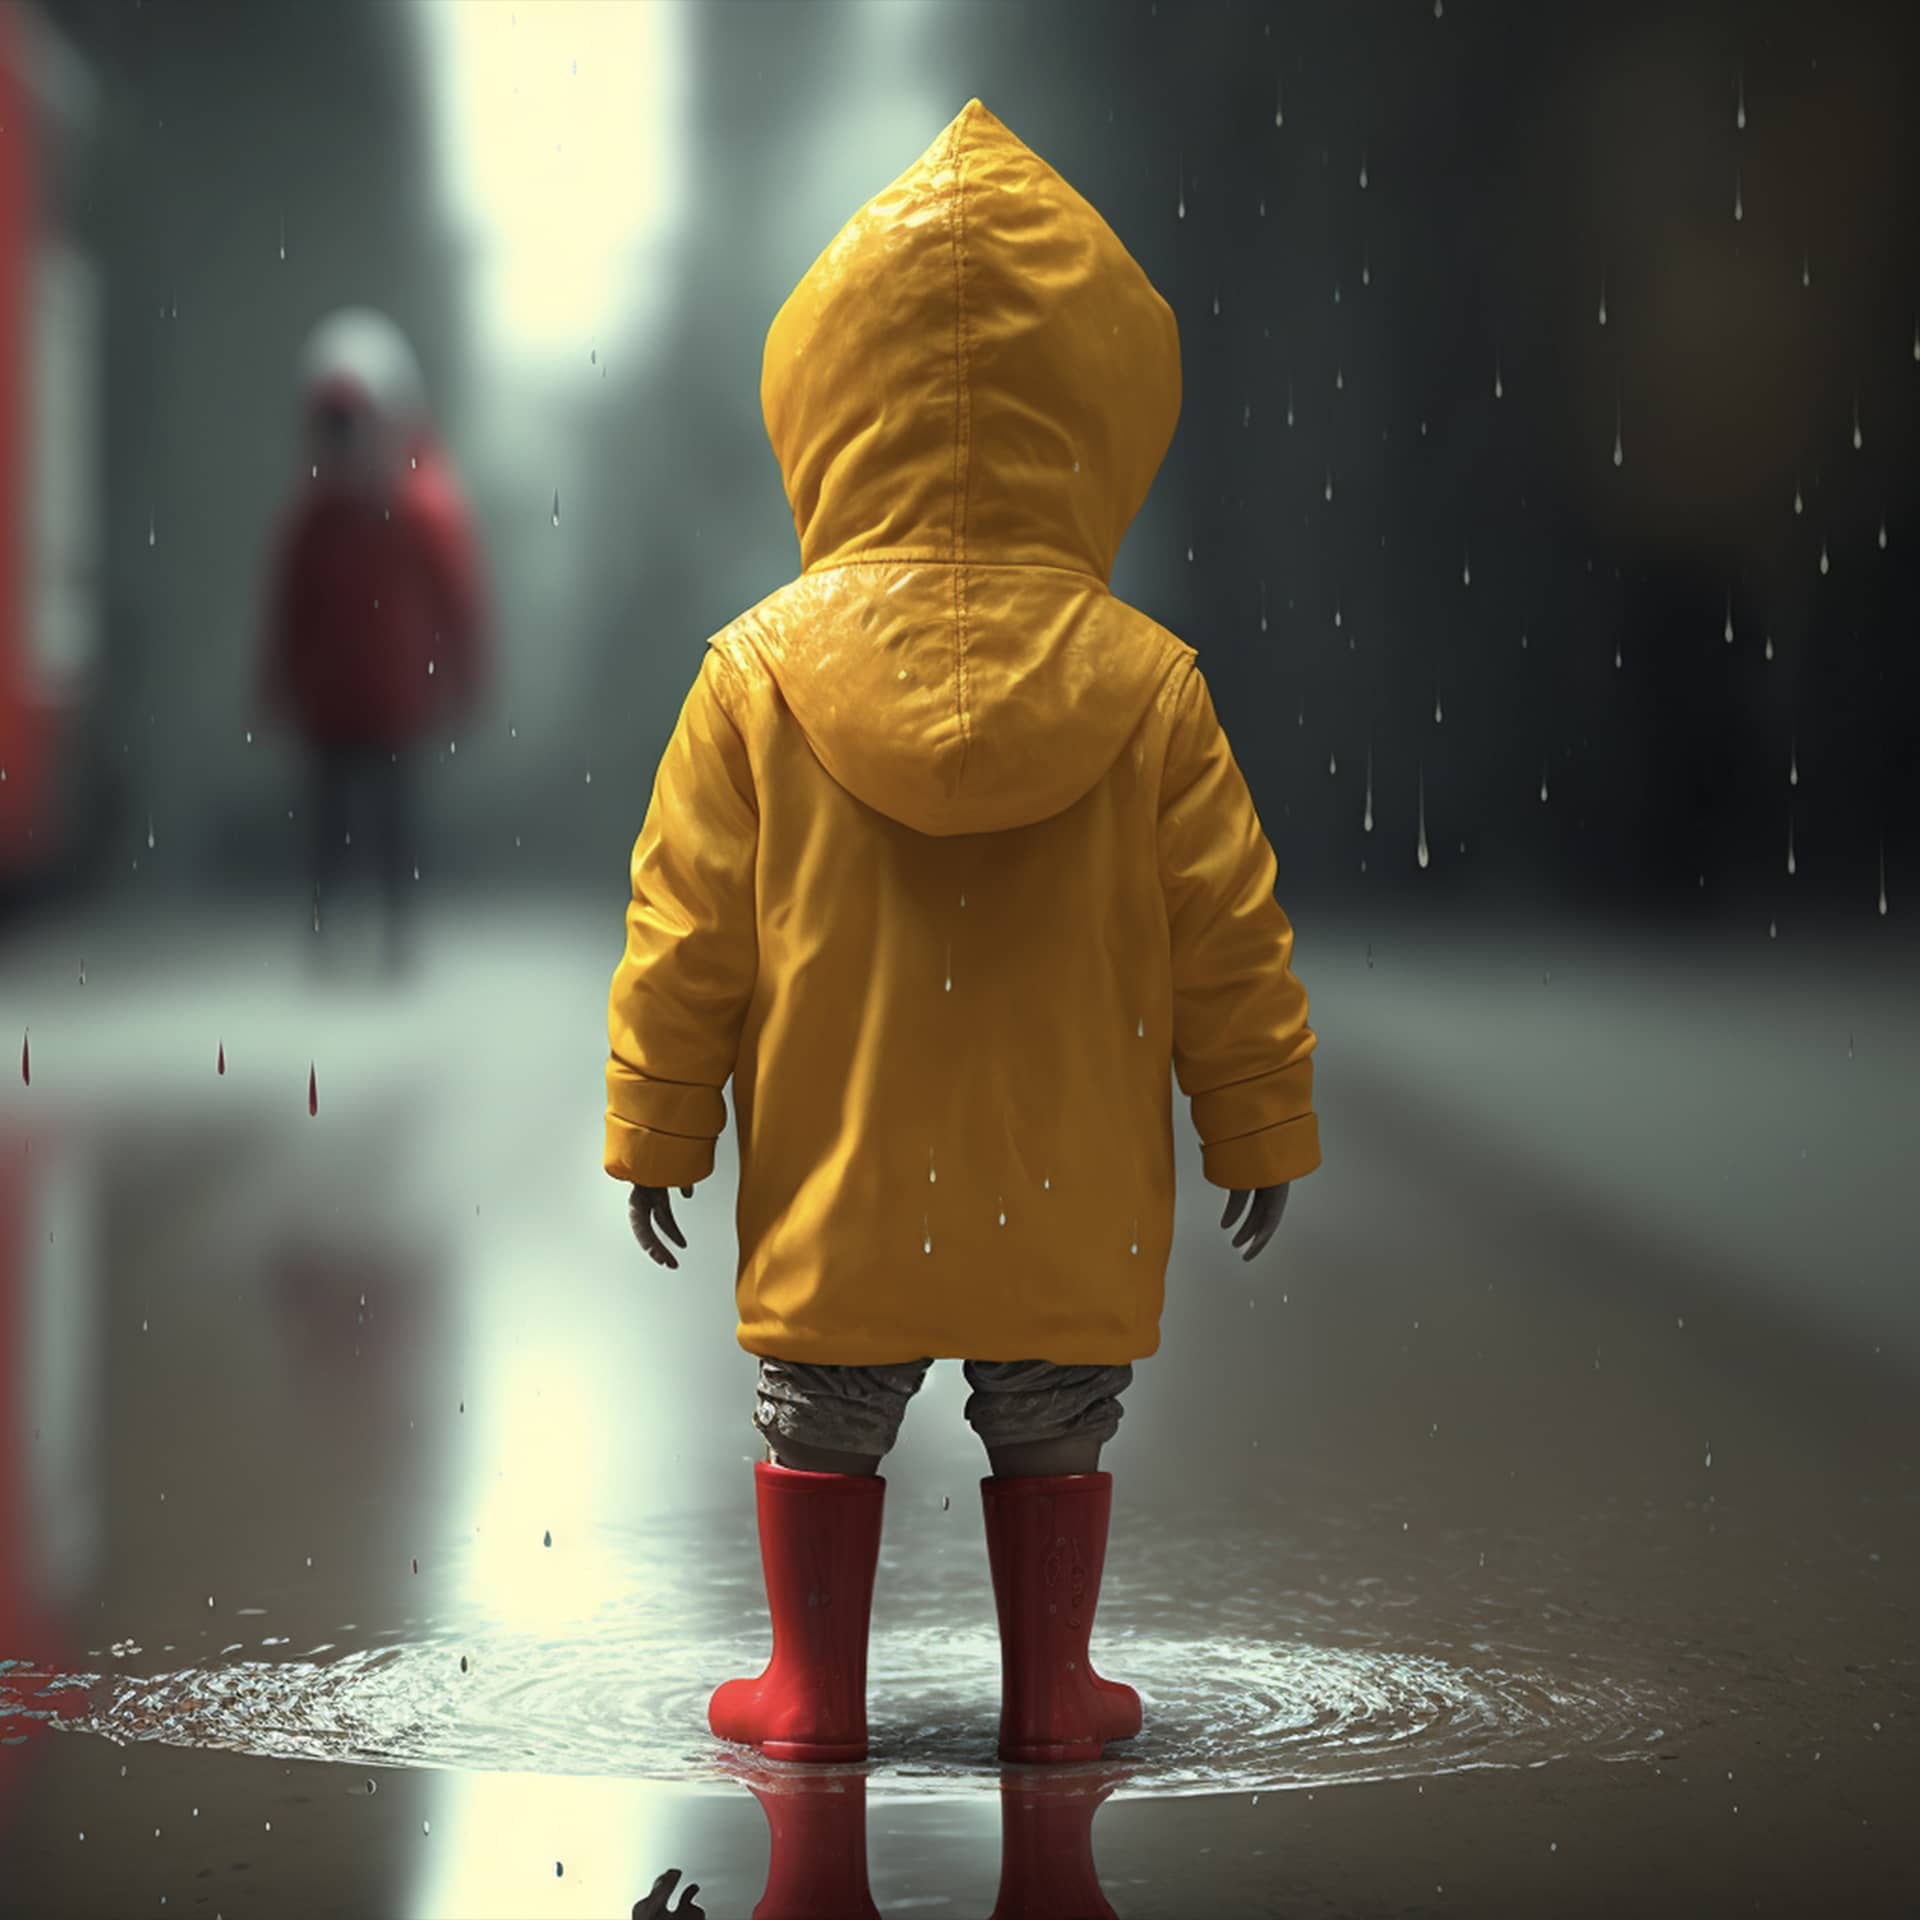 Boy playing puddle rainy day pinterest profile picture